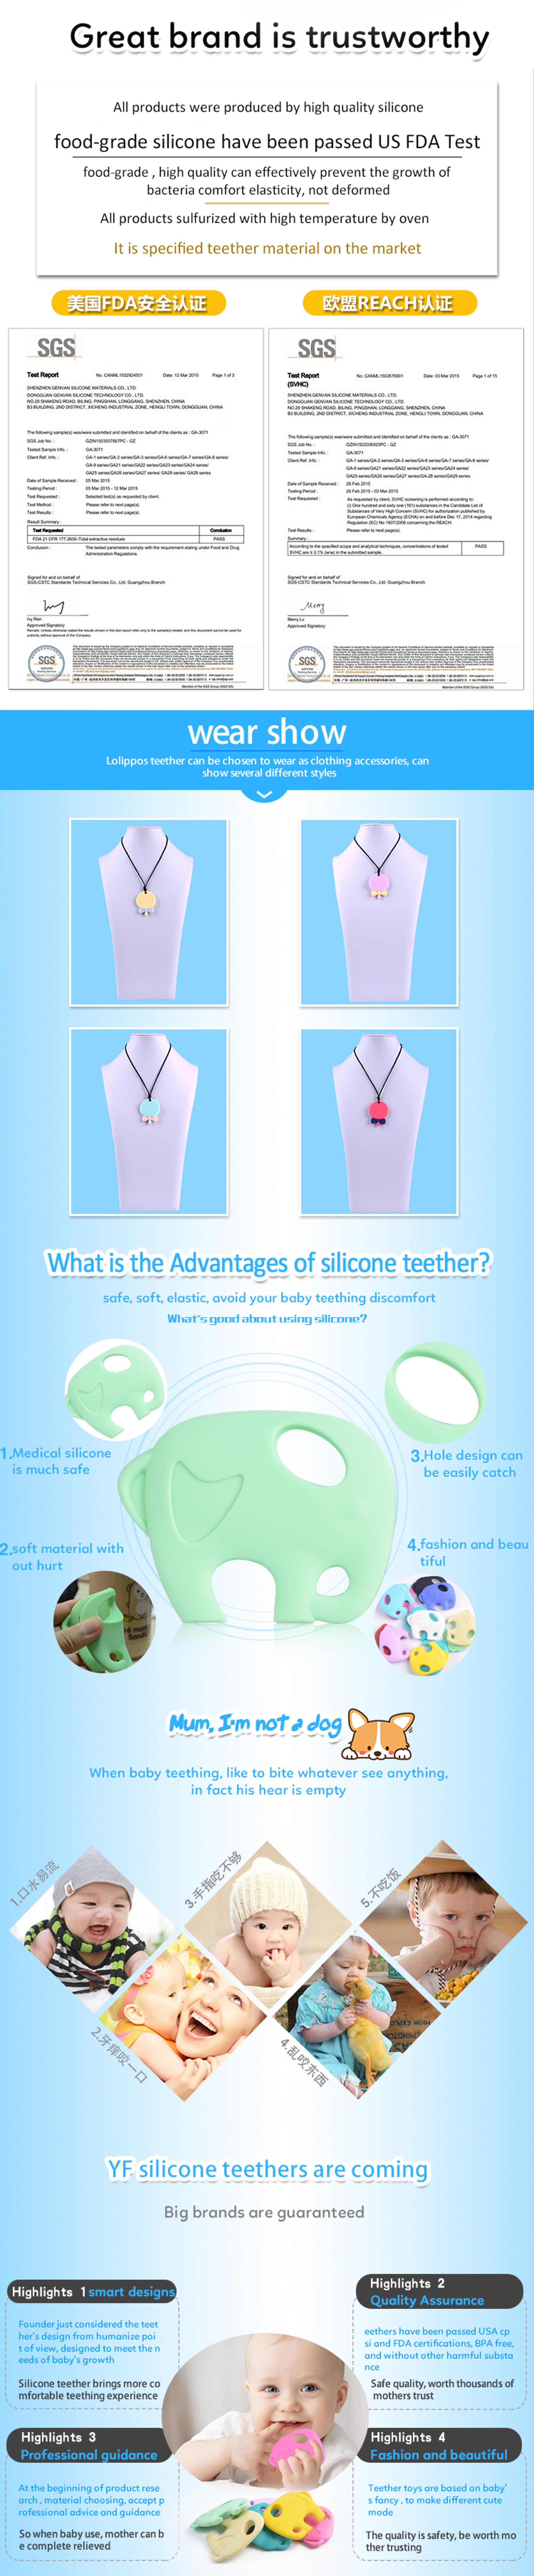  BPA Free Silicone Teething Pendant Necklace Details 9